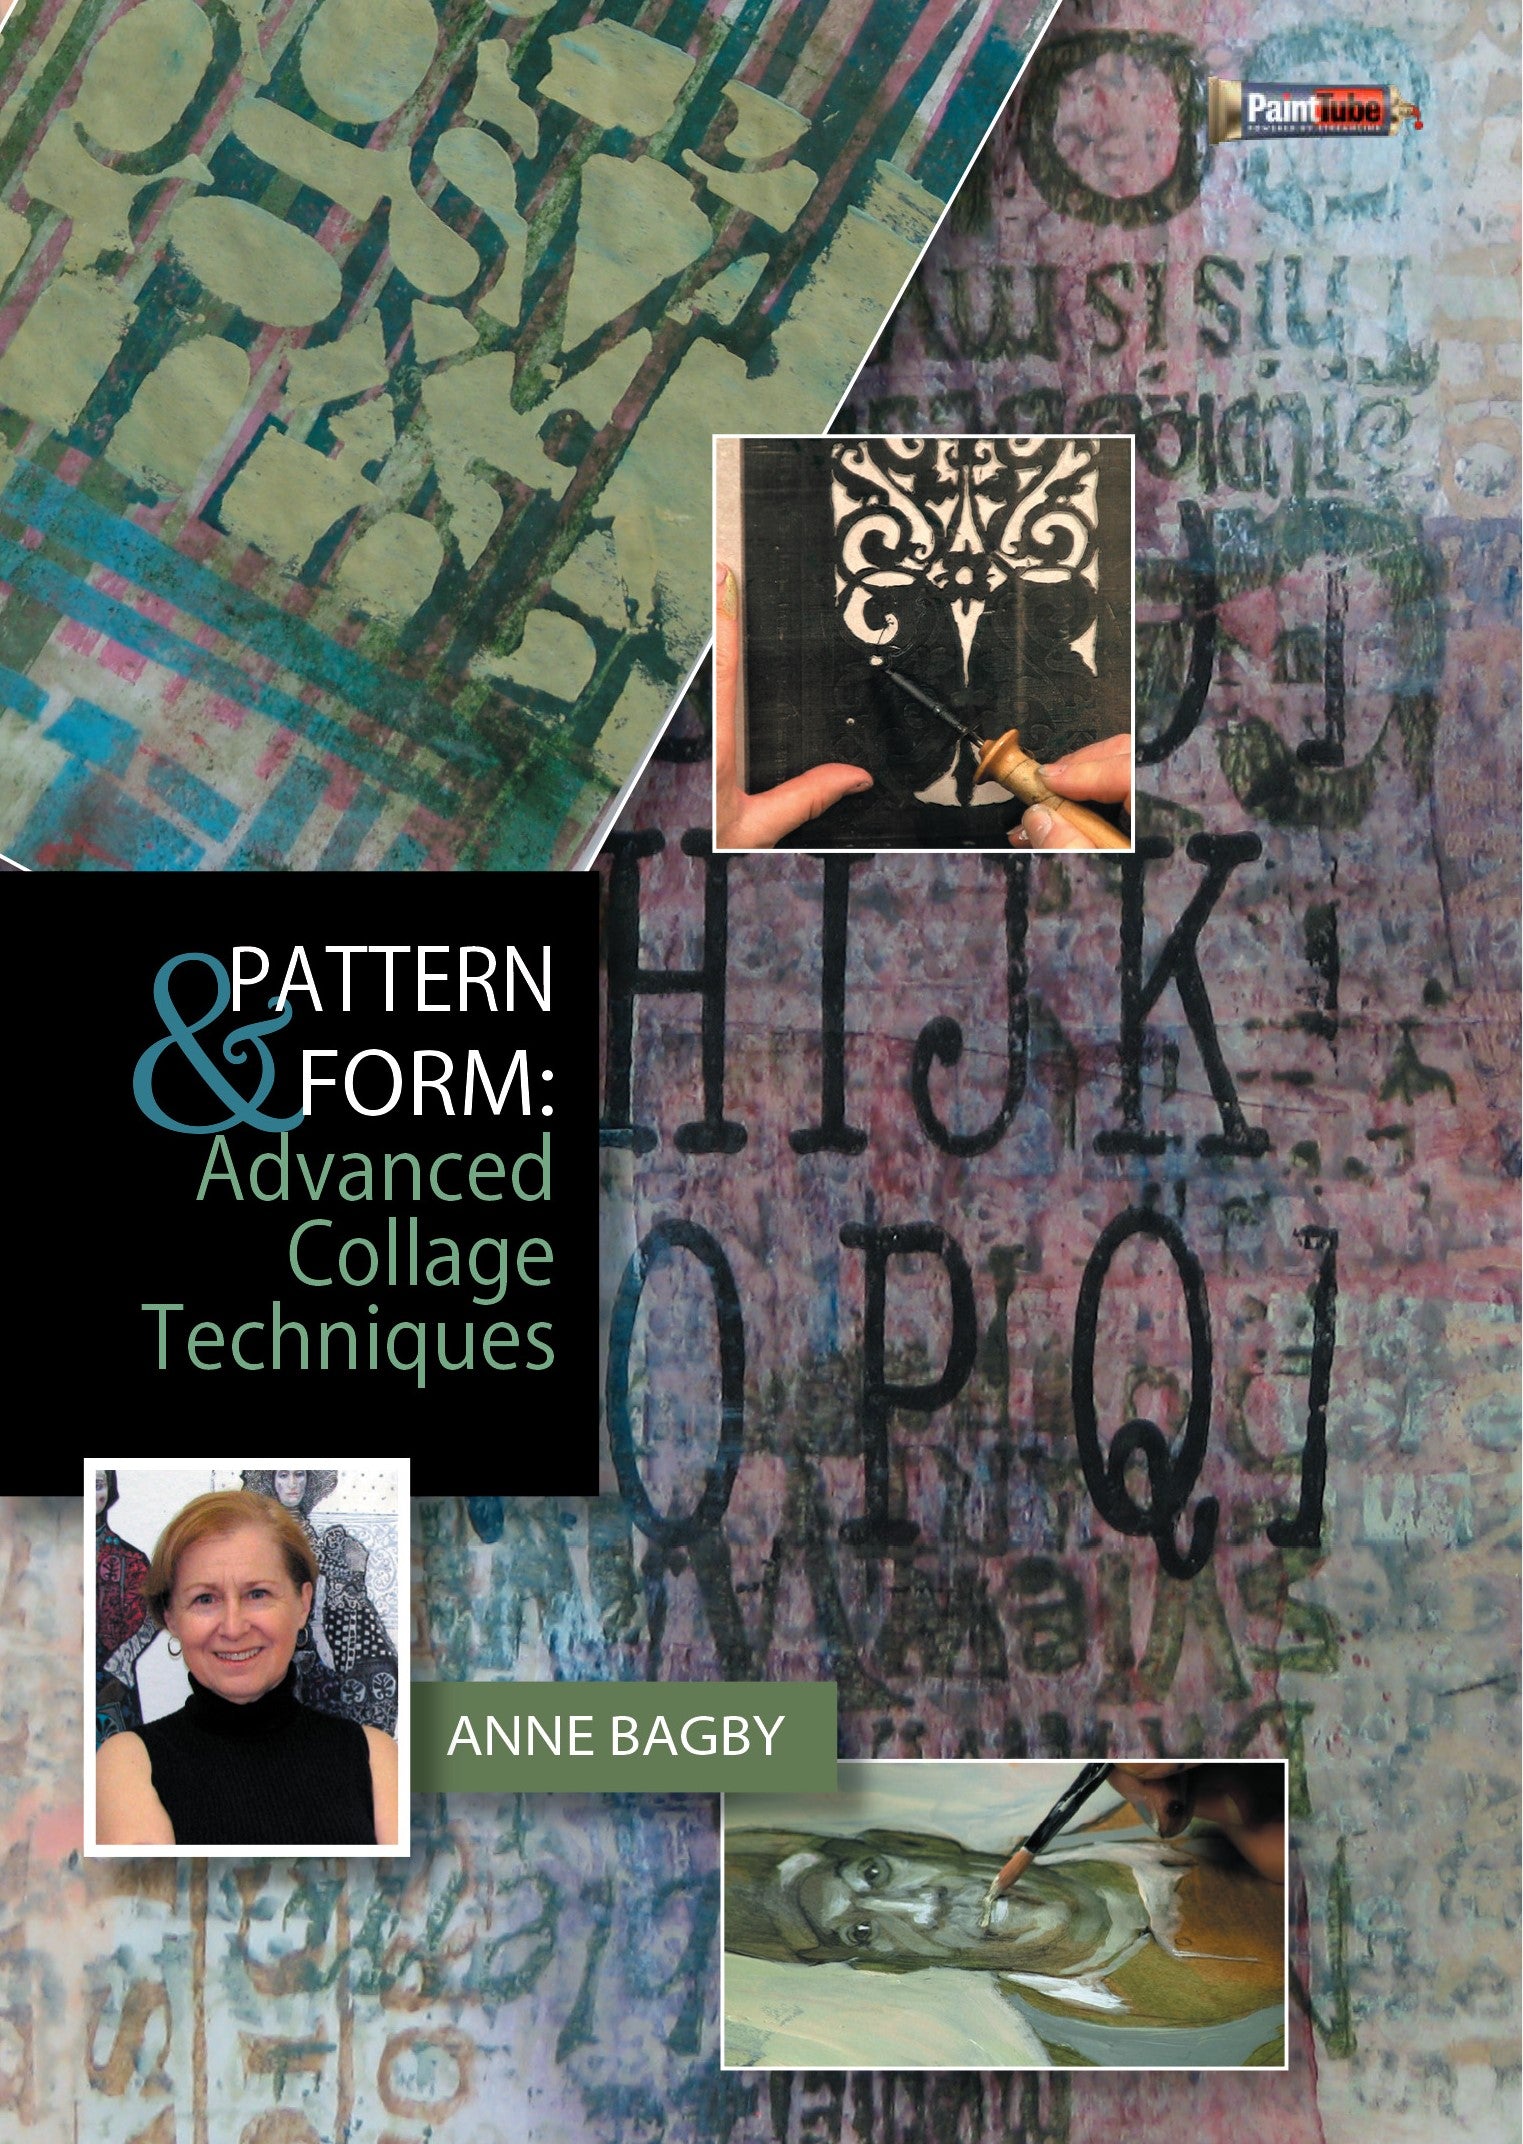 Anne Bagby: Pattern & Form: Advanced Collage Techniques